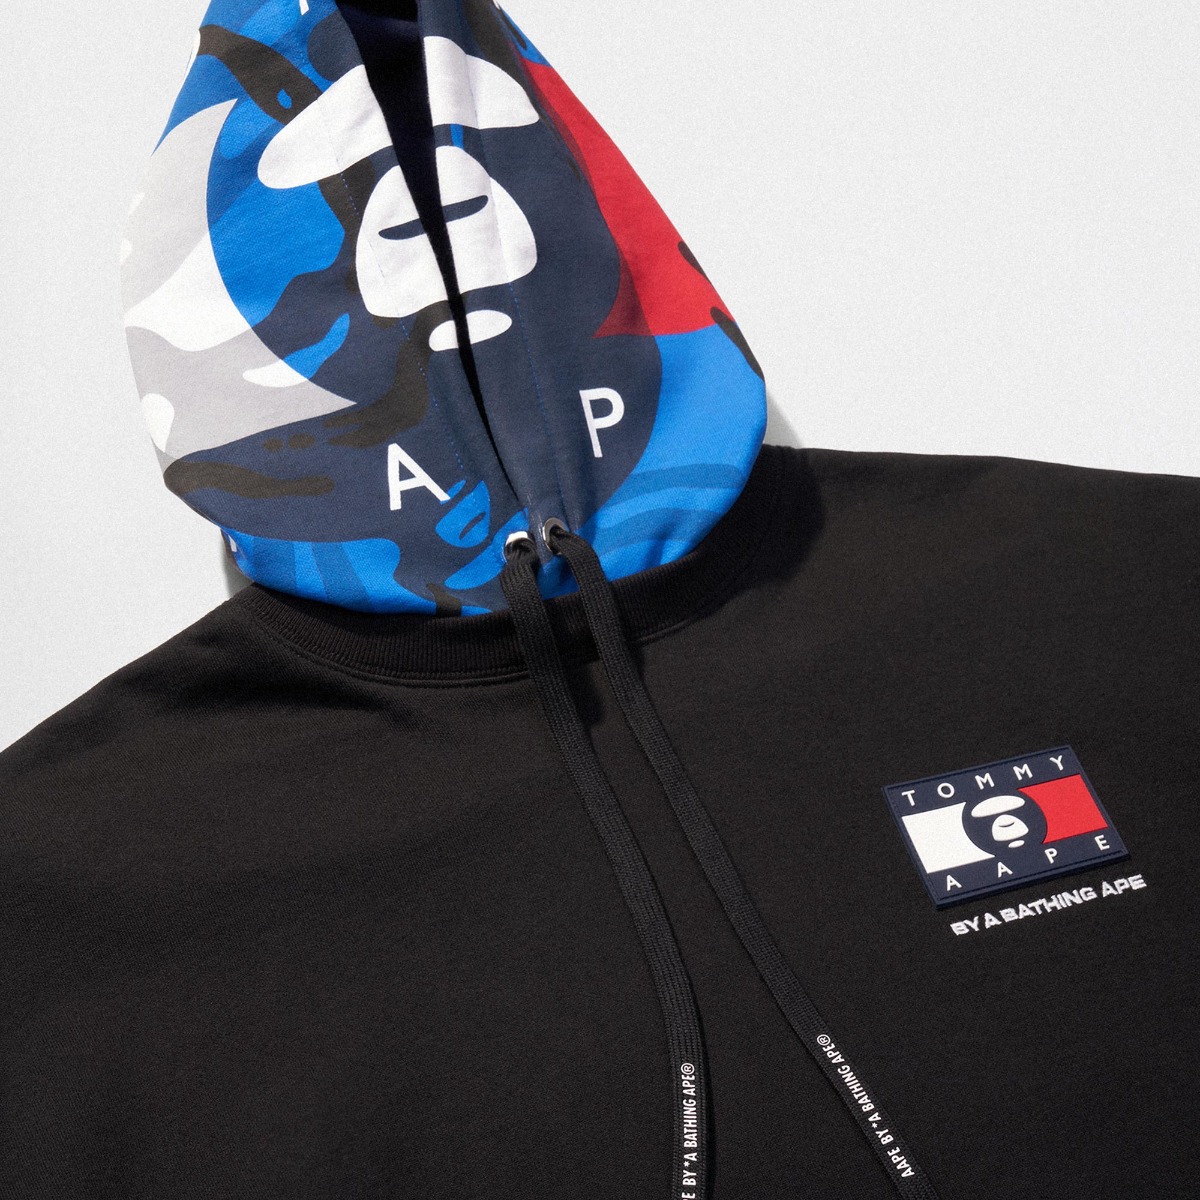 <div style="text-align: left">TOMMY JEANS x AAPE</div>